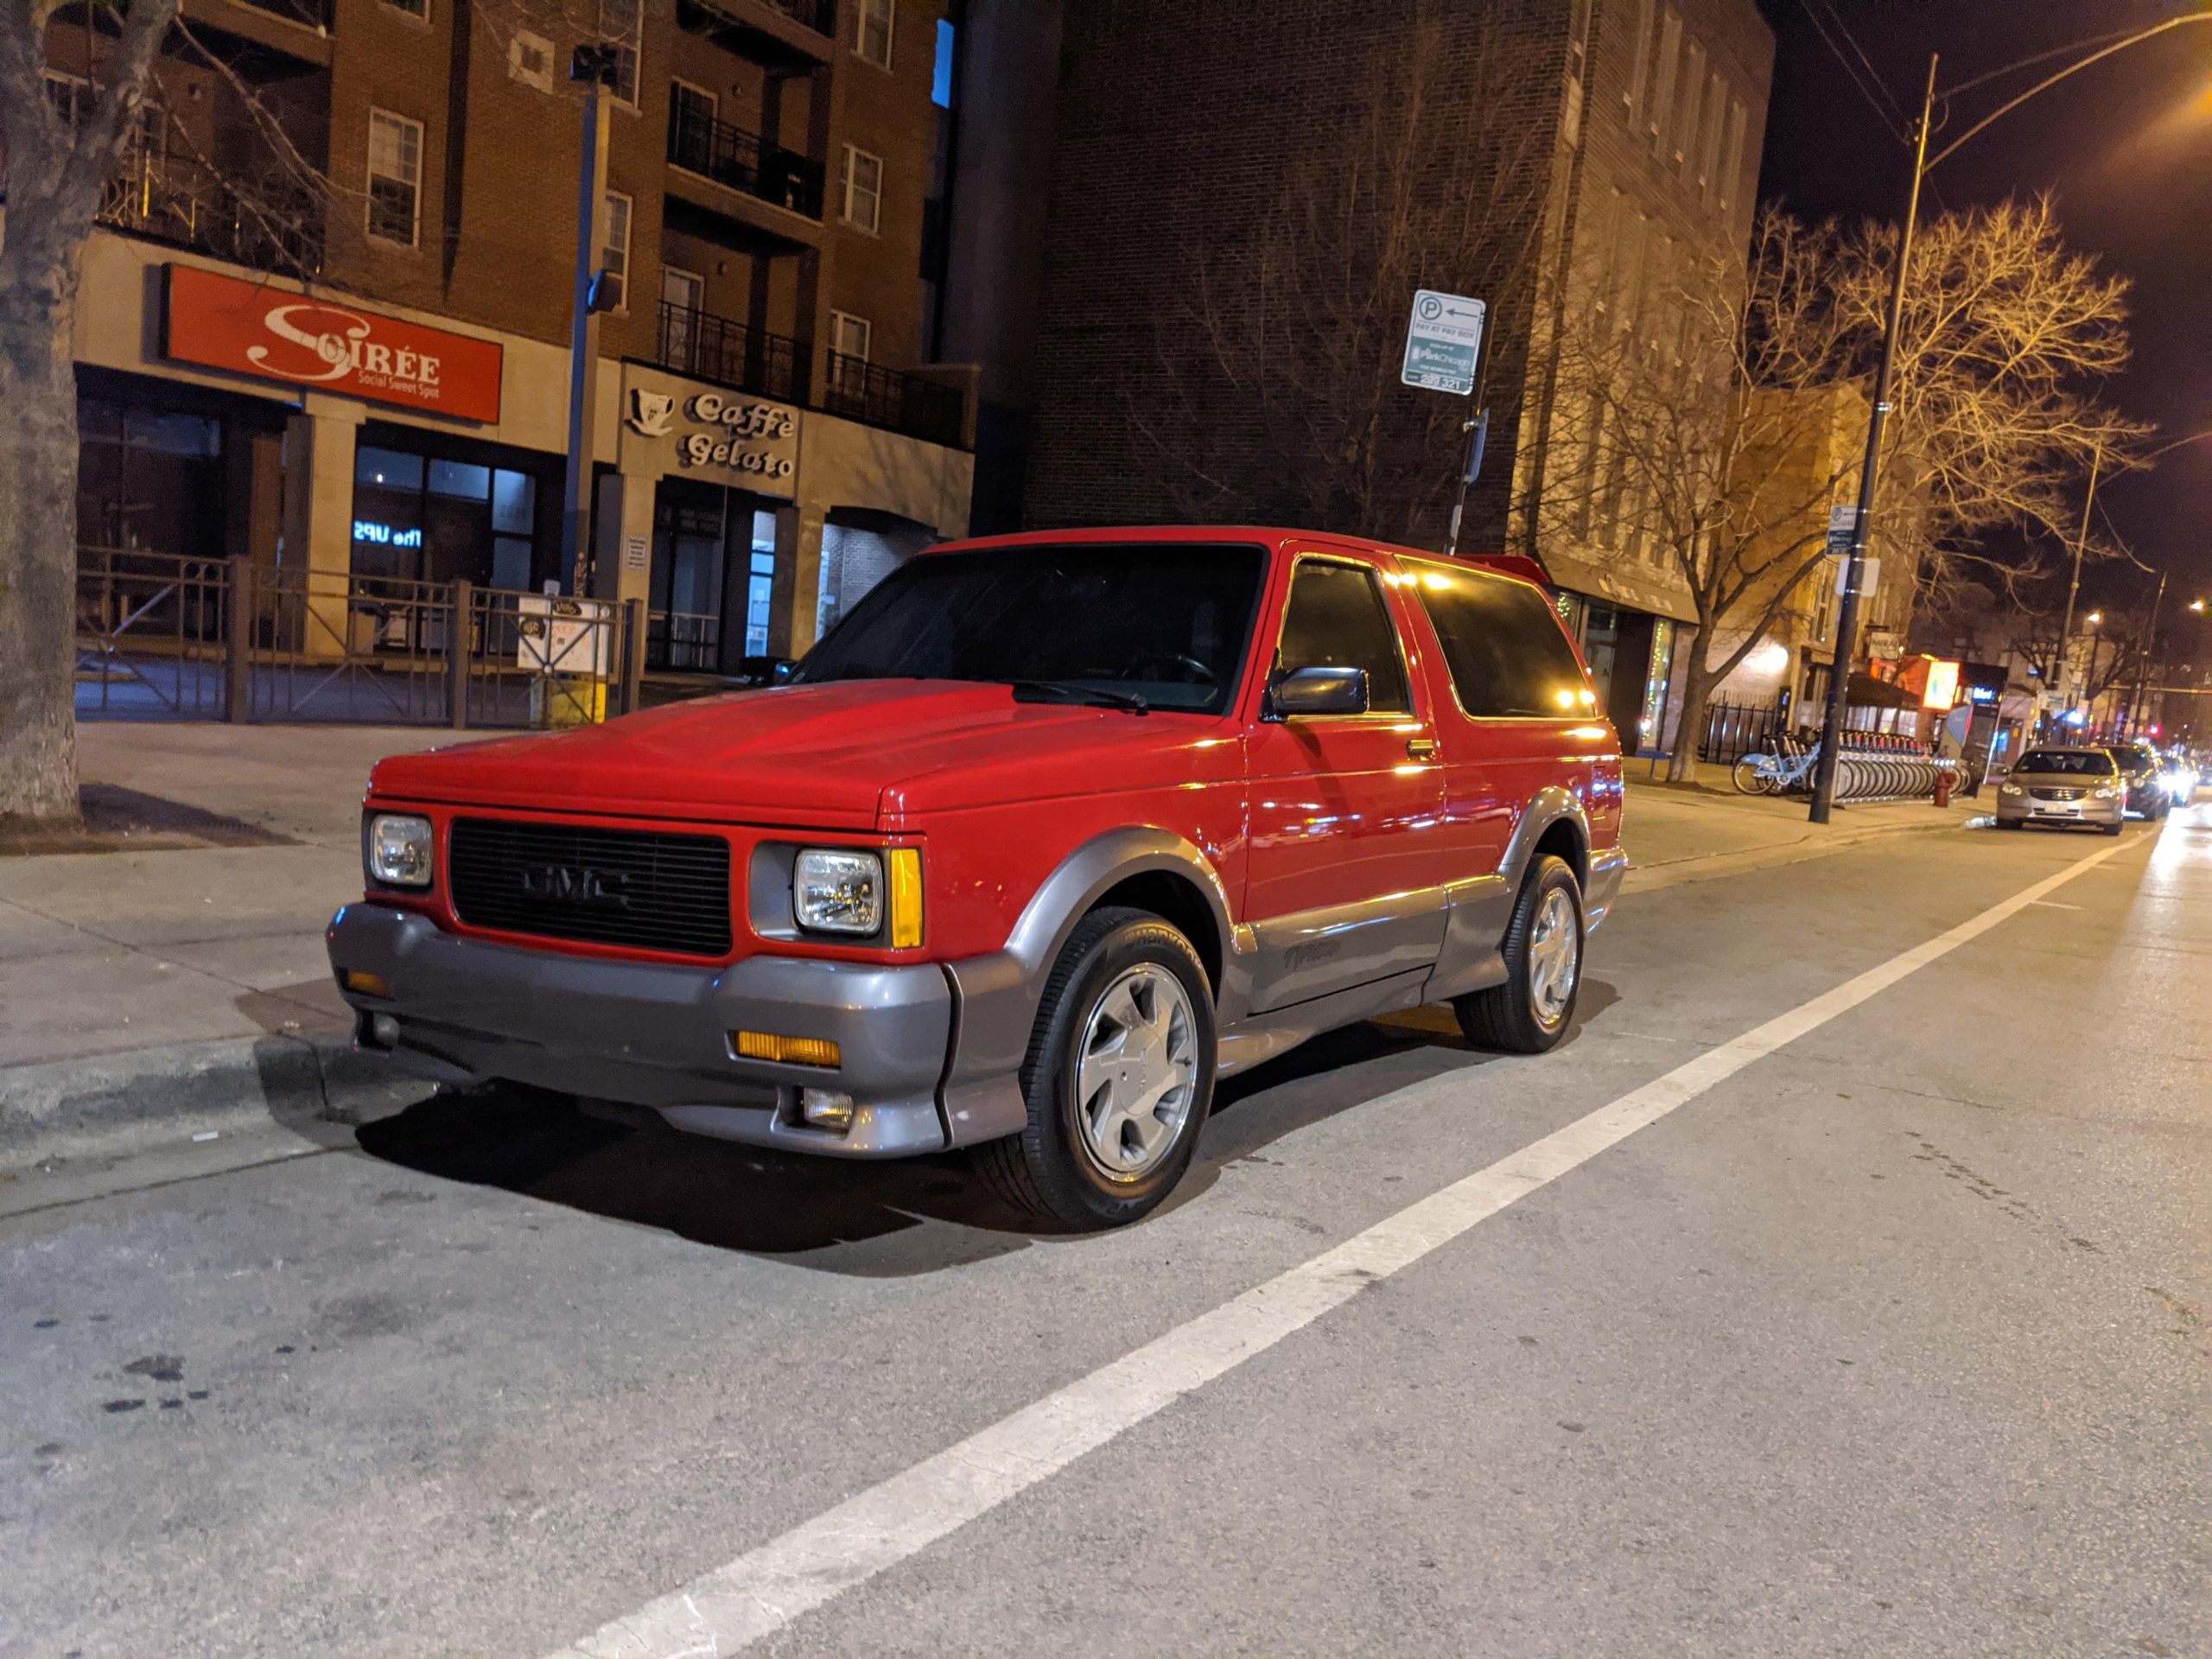 Pristine GMC Typhoon spotted in Chicago last night